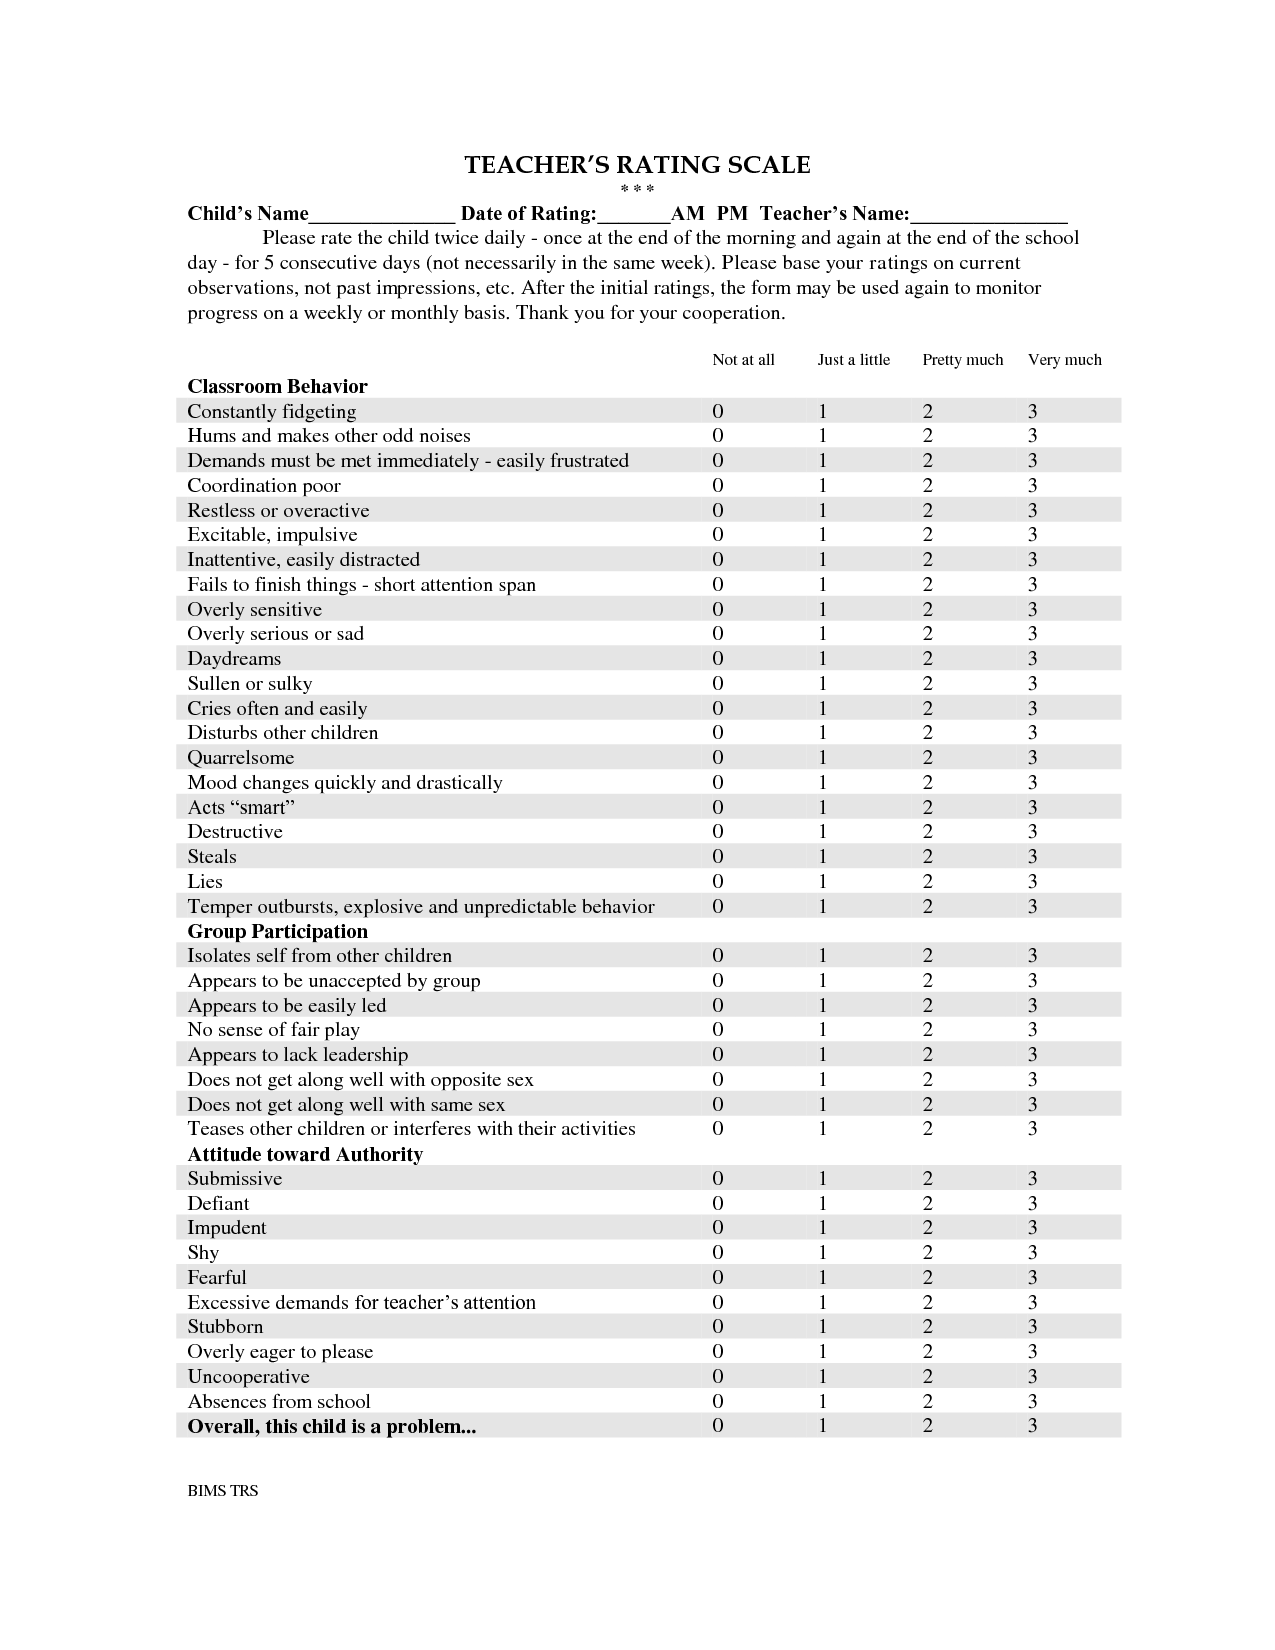 Conners Rating Scale Printable Forms - Printable Forms Free Online